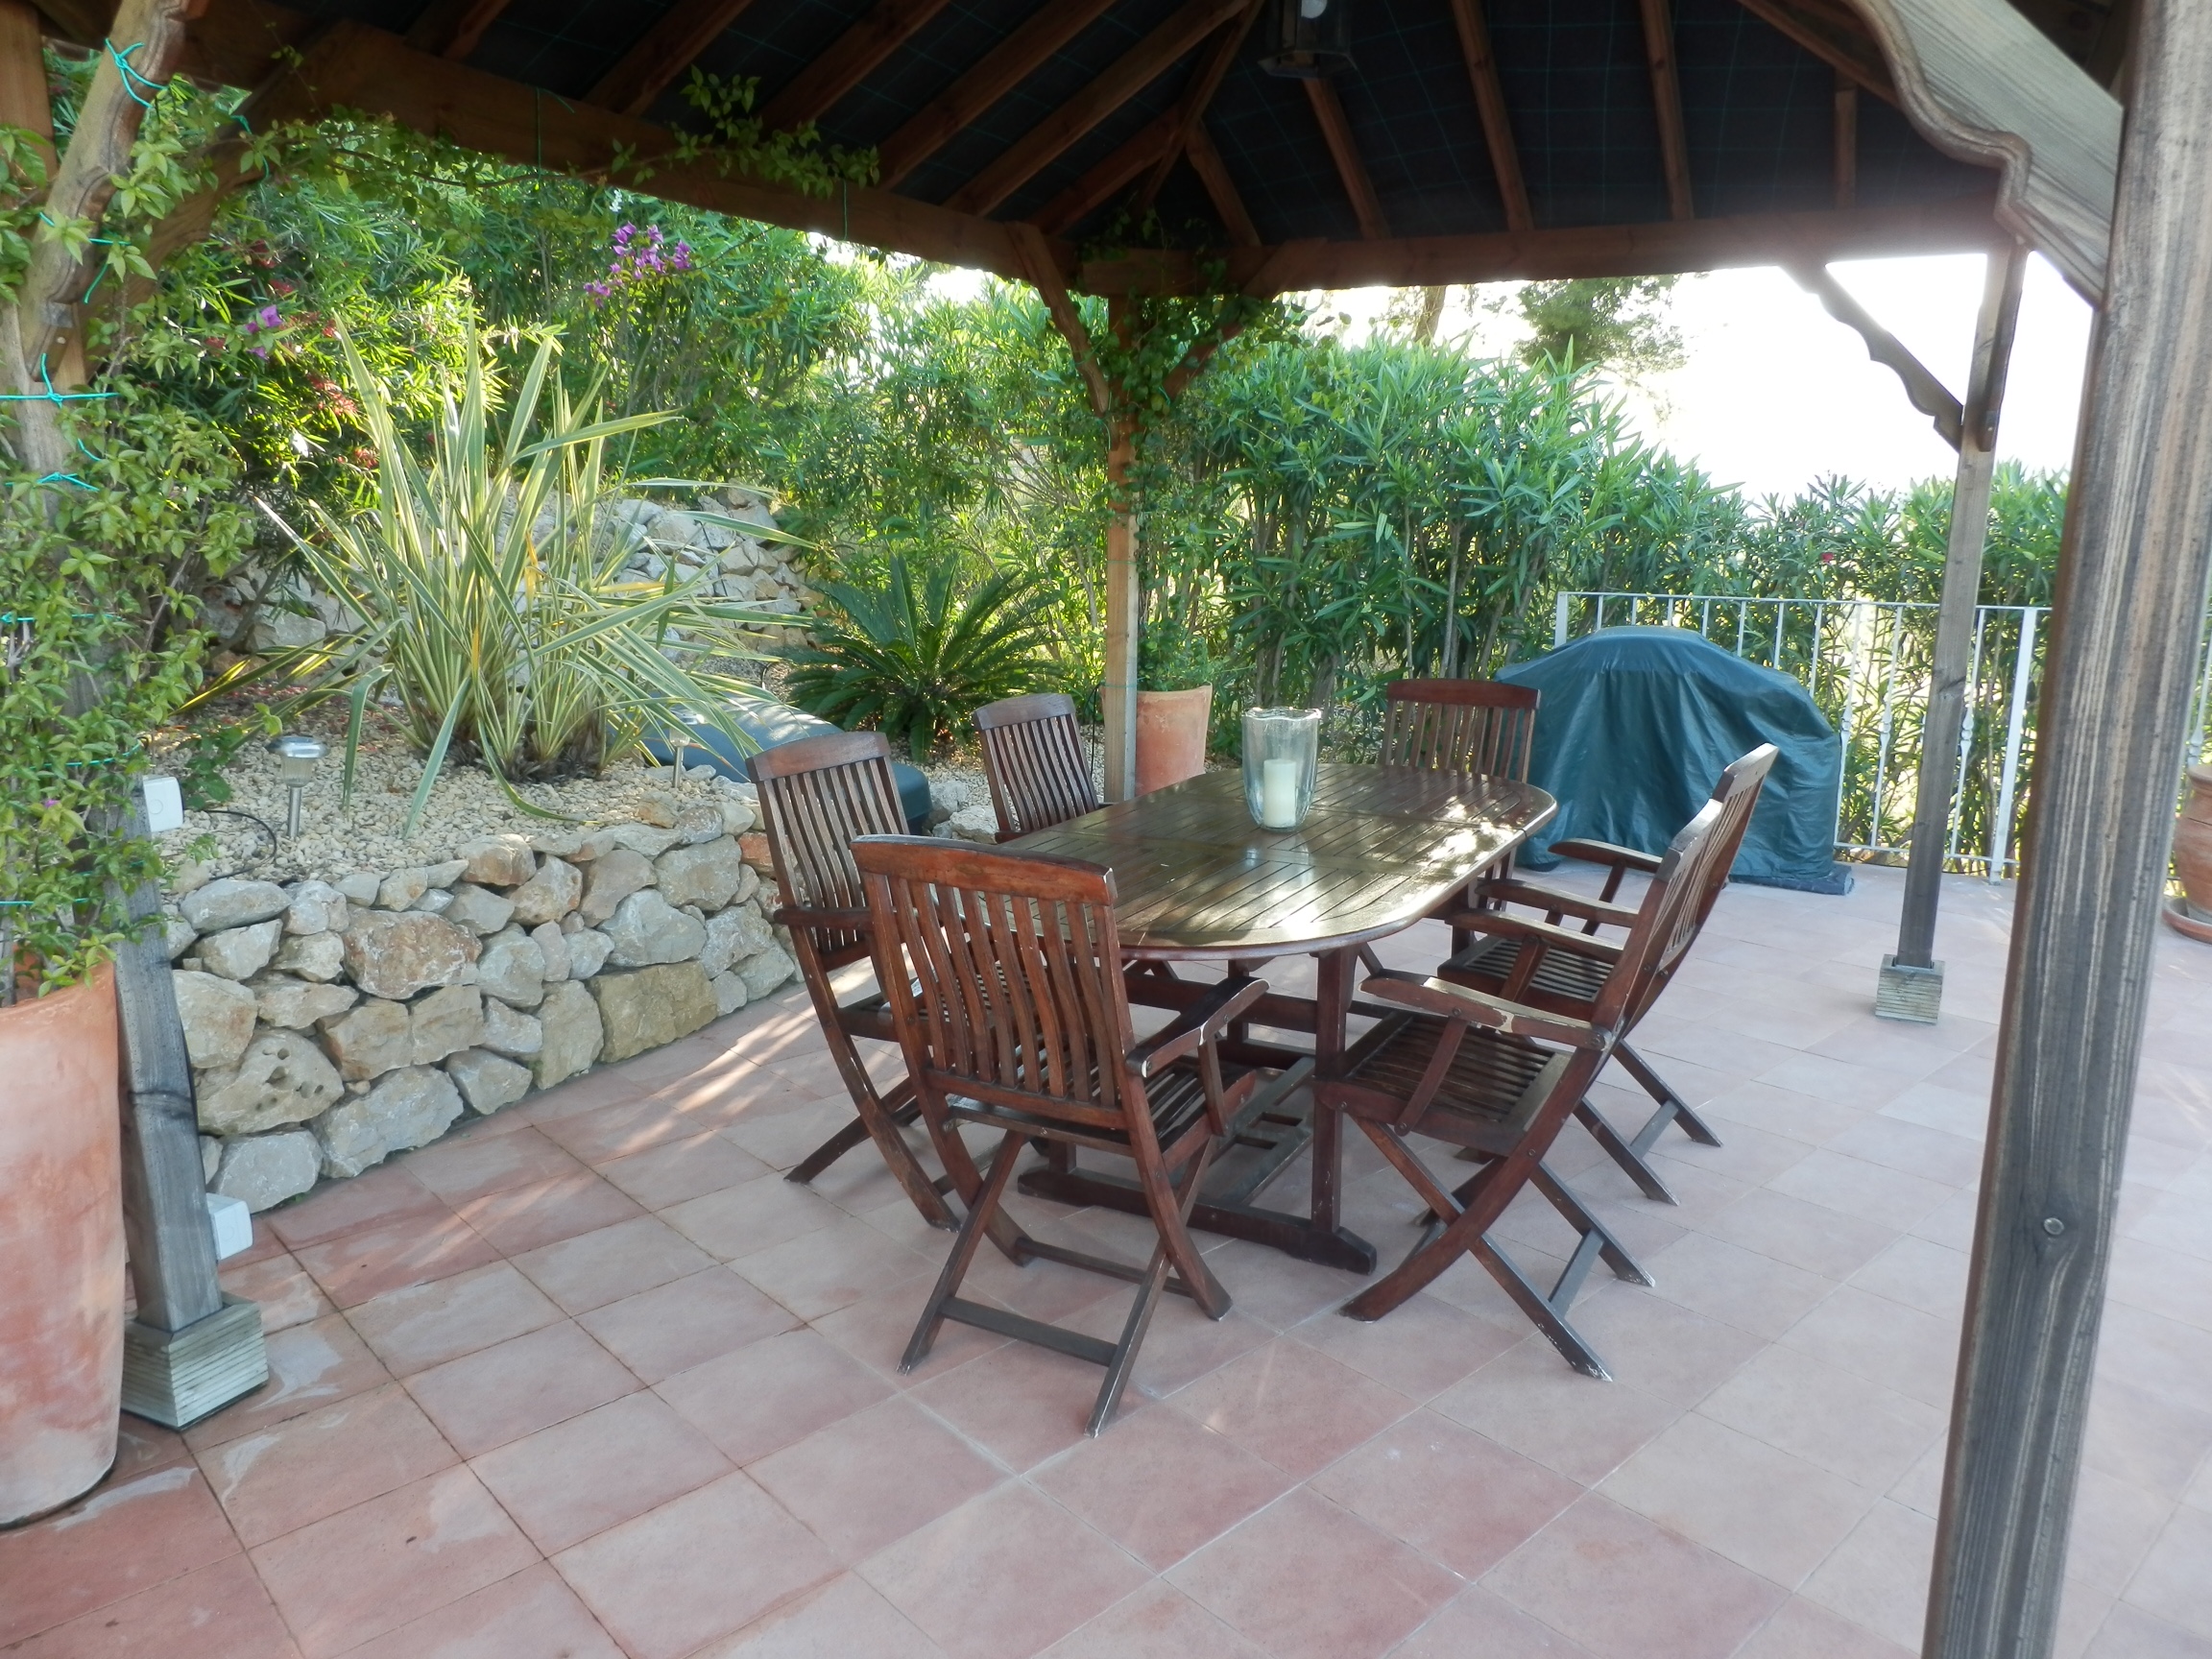 For sale in Orba:  Villa with fabulous views and tourist licence